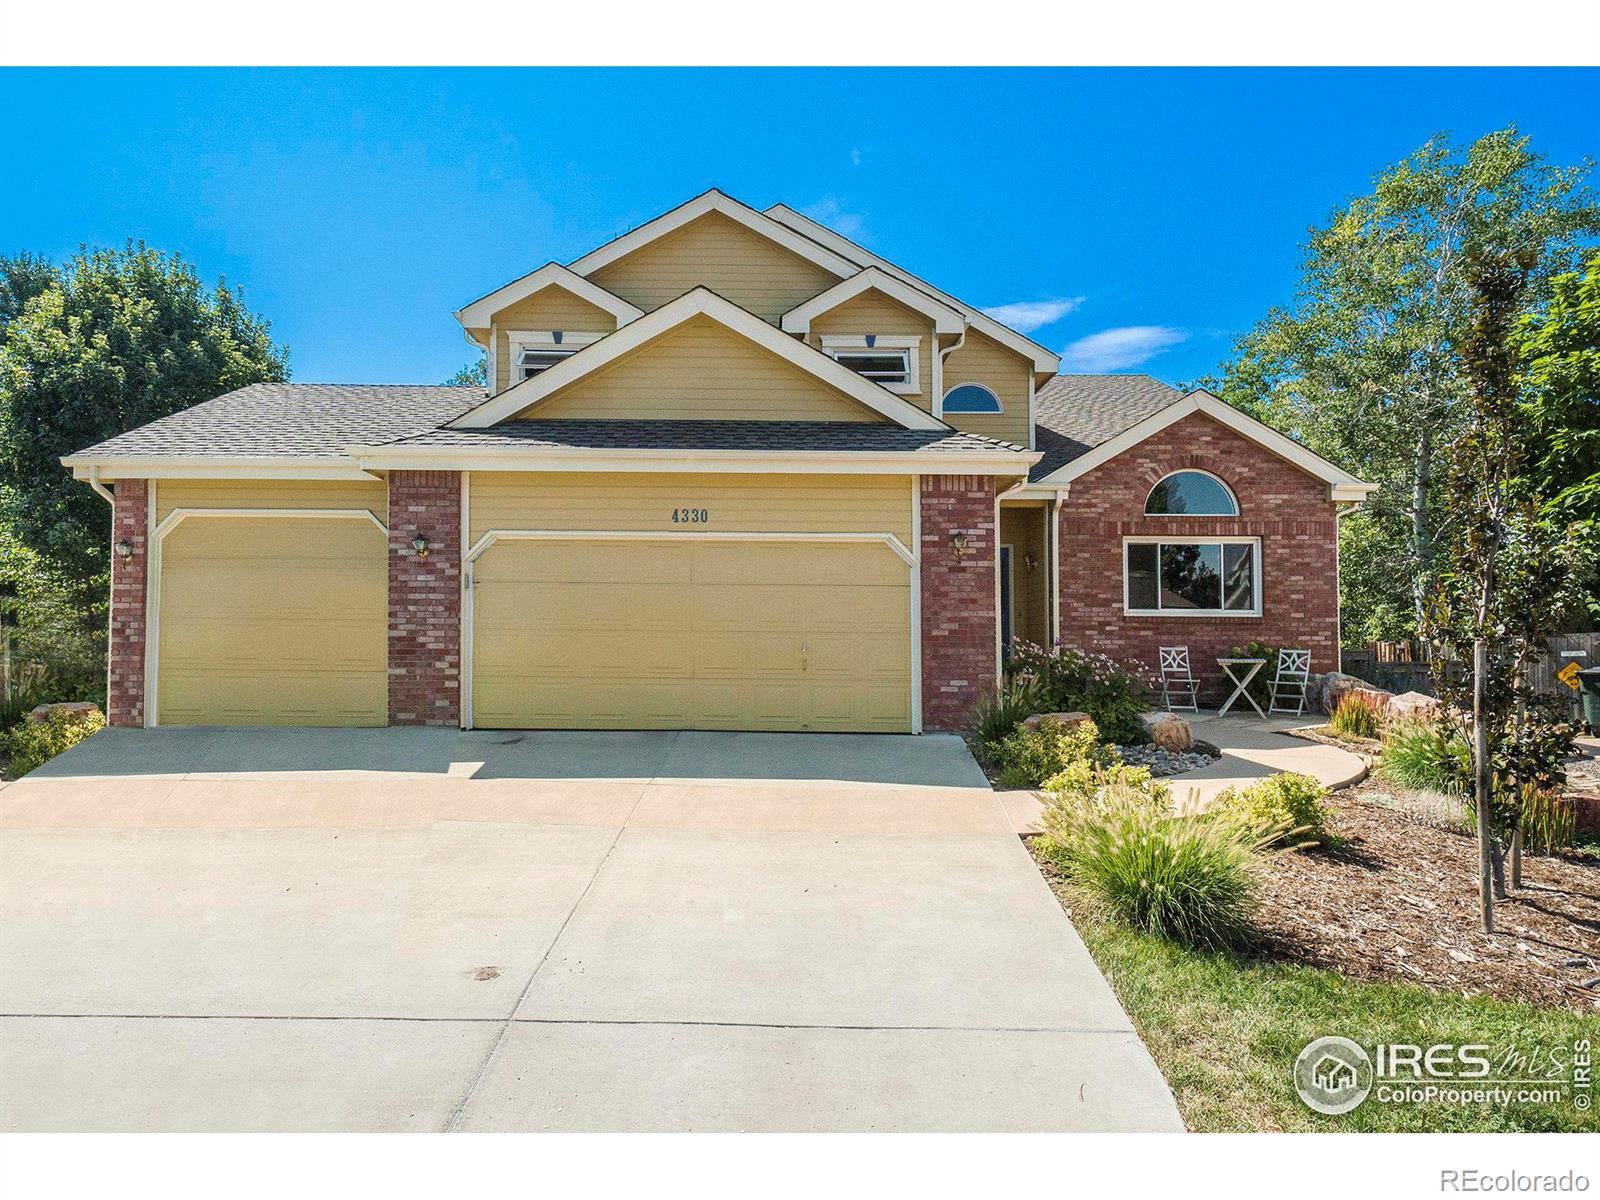 4330  Pearlgate Court, fort collins MLS: 123456789994989 Beds: 5 Baths: 4 Price: $773,000